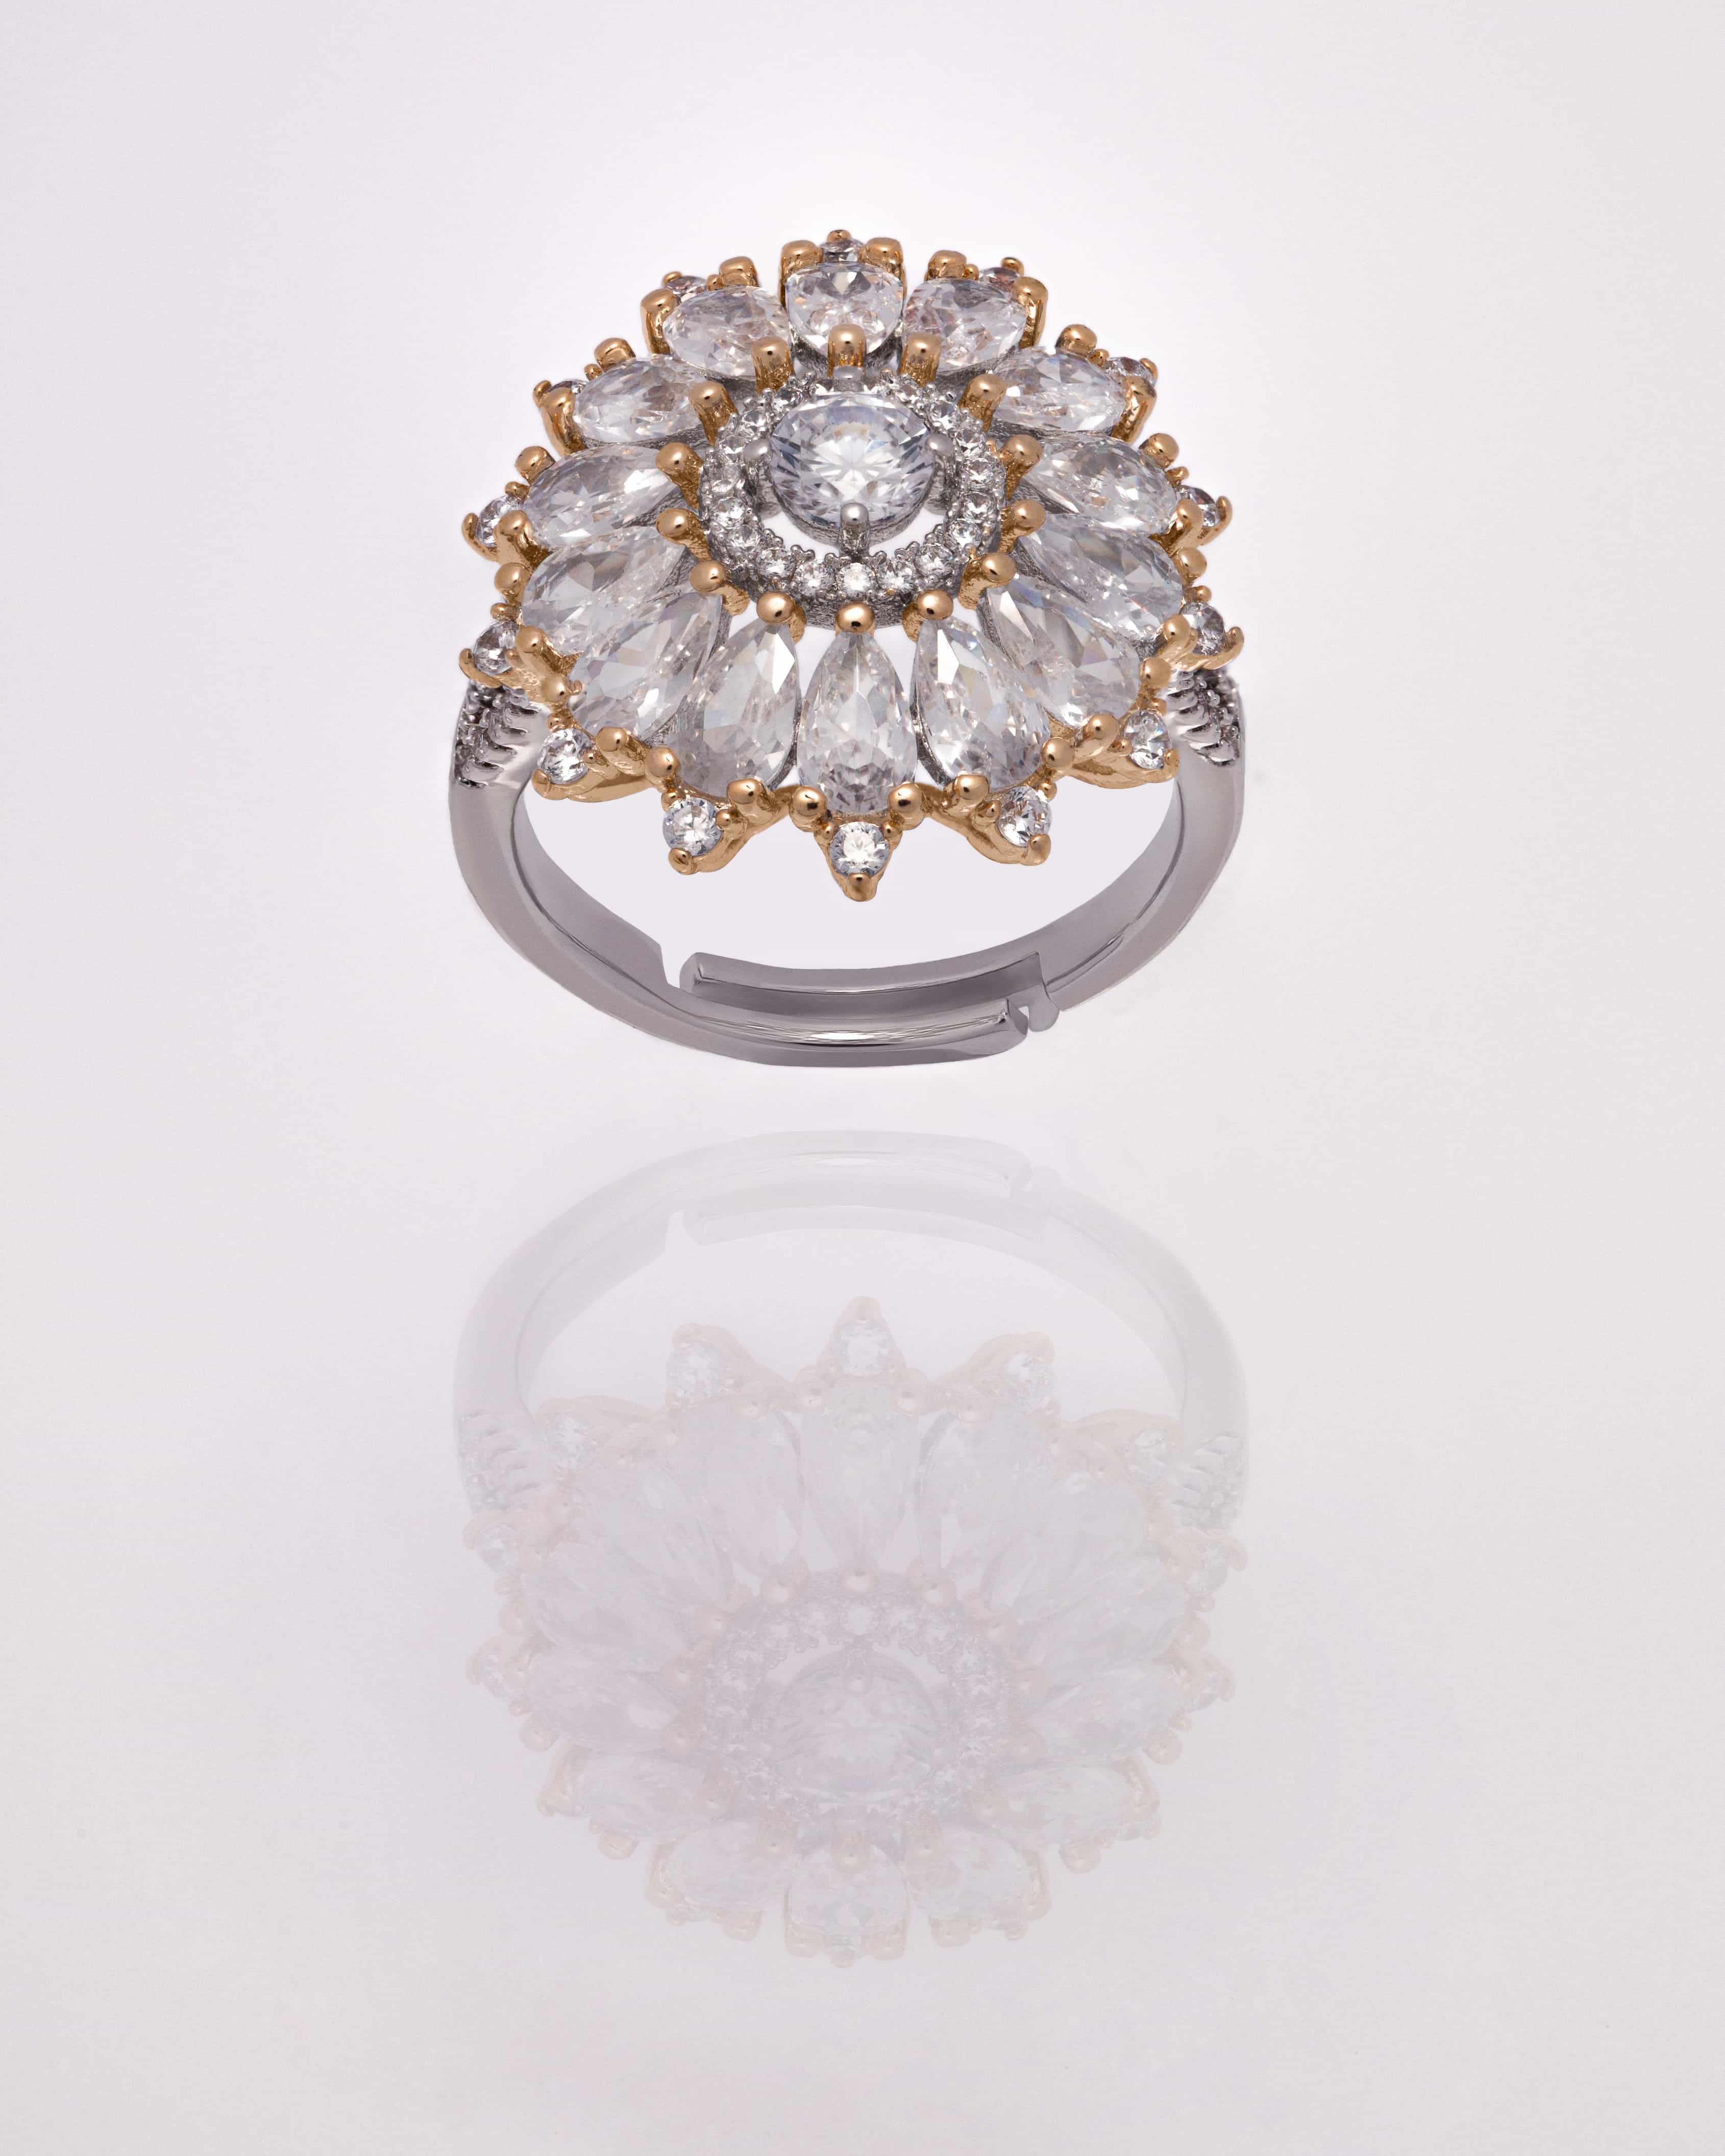 A close up of a white golden ring with a large oval diamond stone surrounded by small diamonds set on a white background.